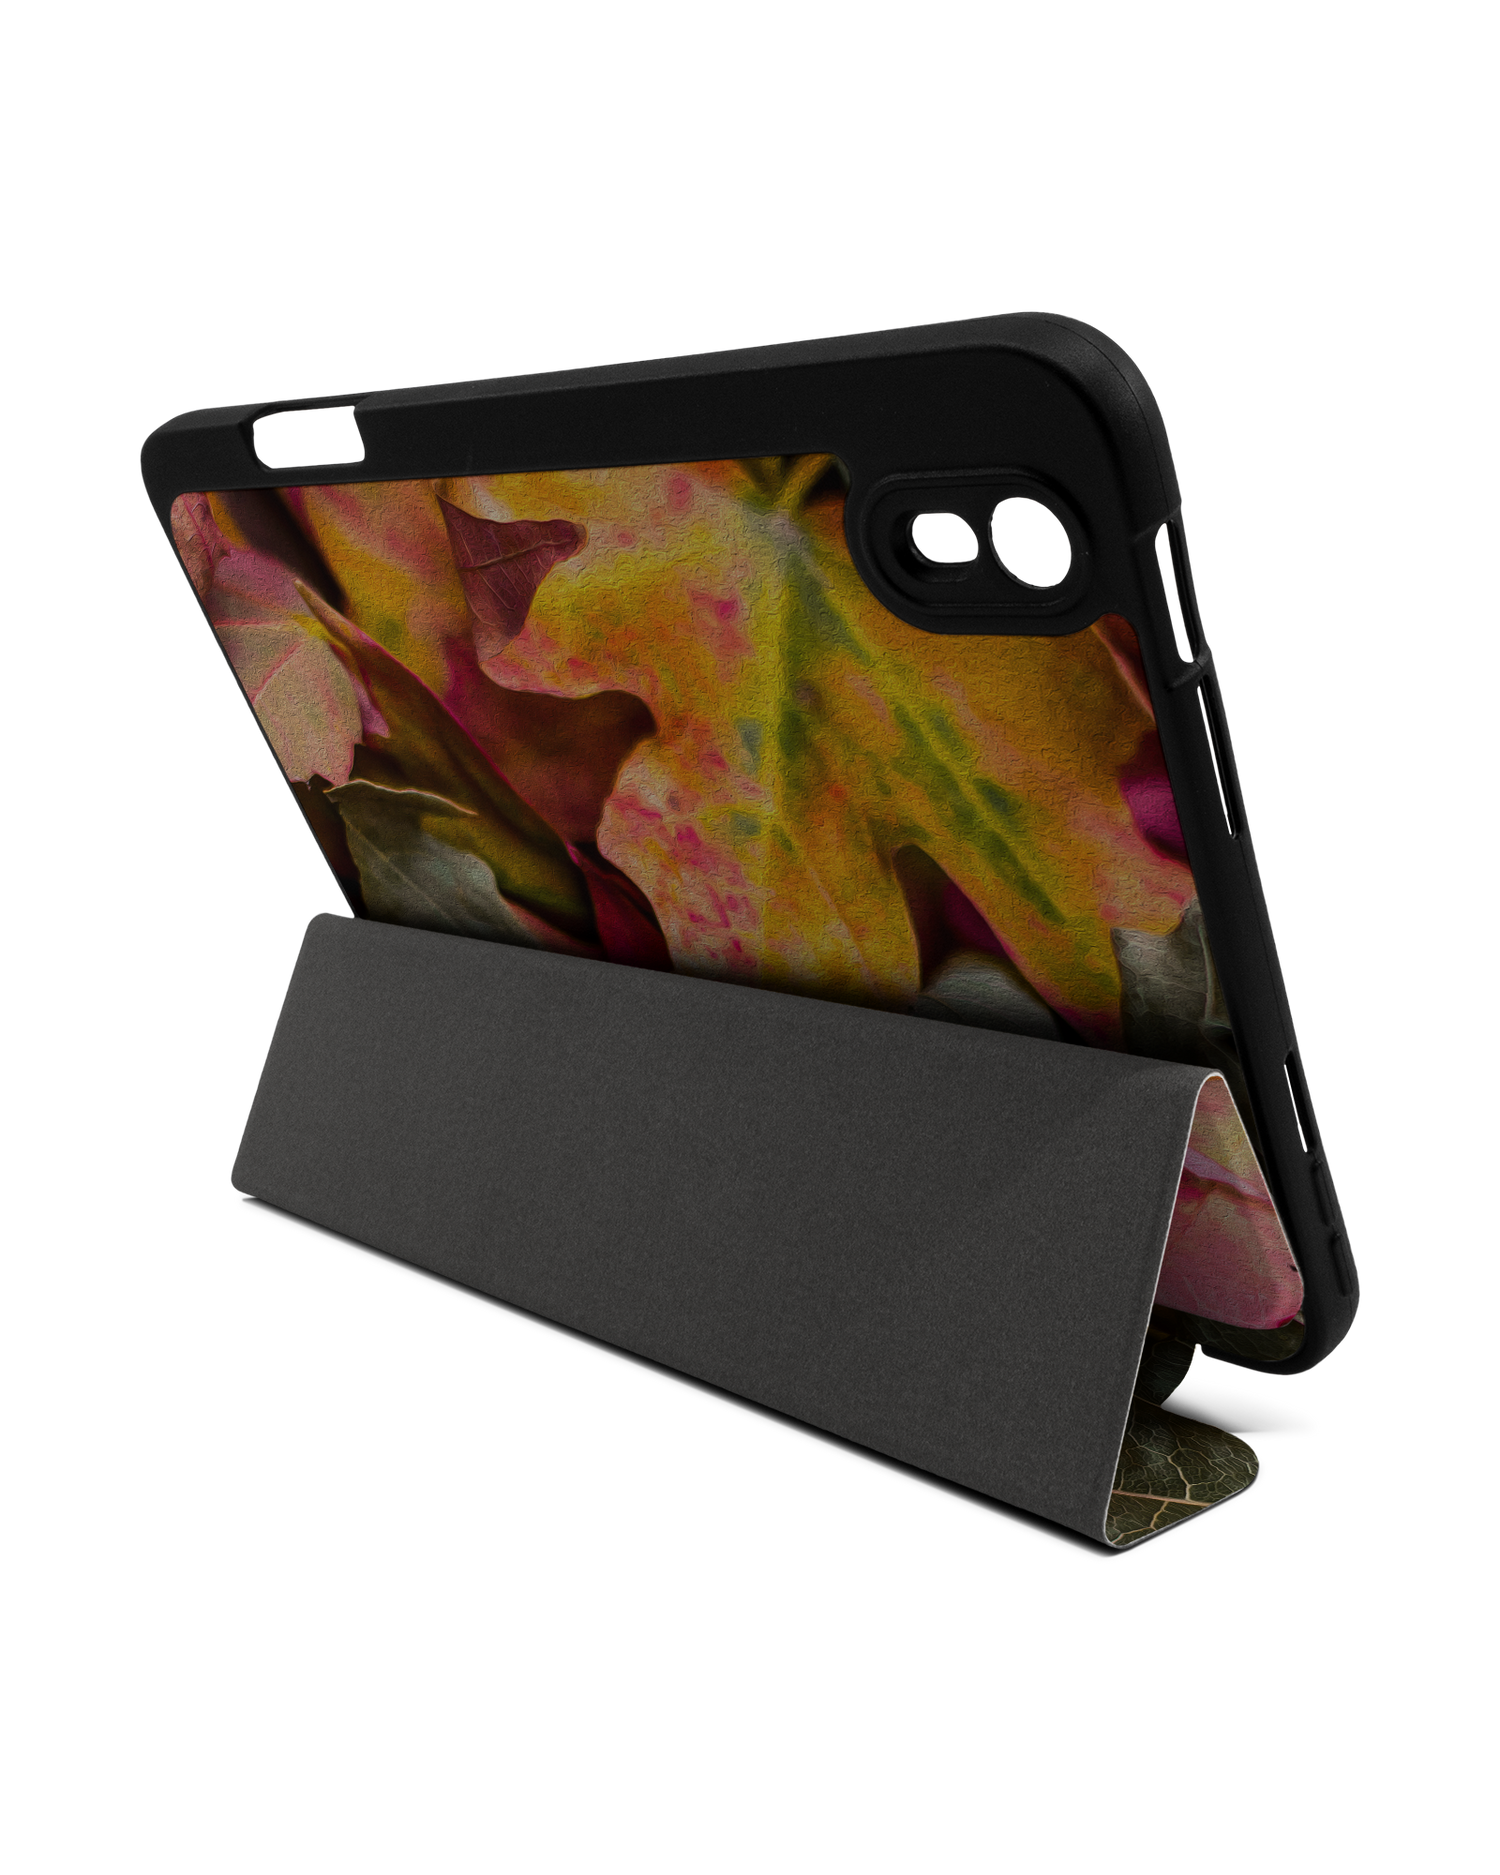 Autumn Leaves iPad Case with Pencil Holder Apple iPad mini 6 (2021): Set up in landscape format (back view)